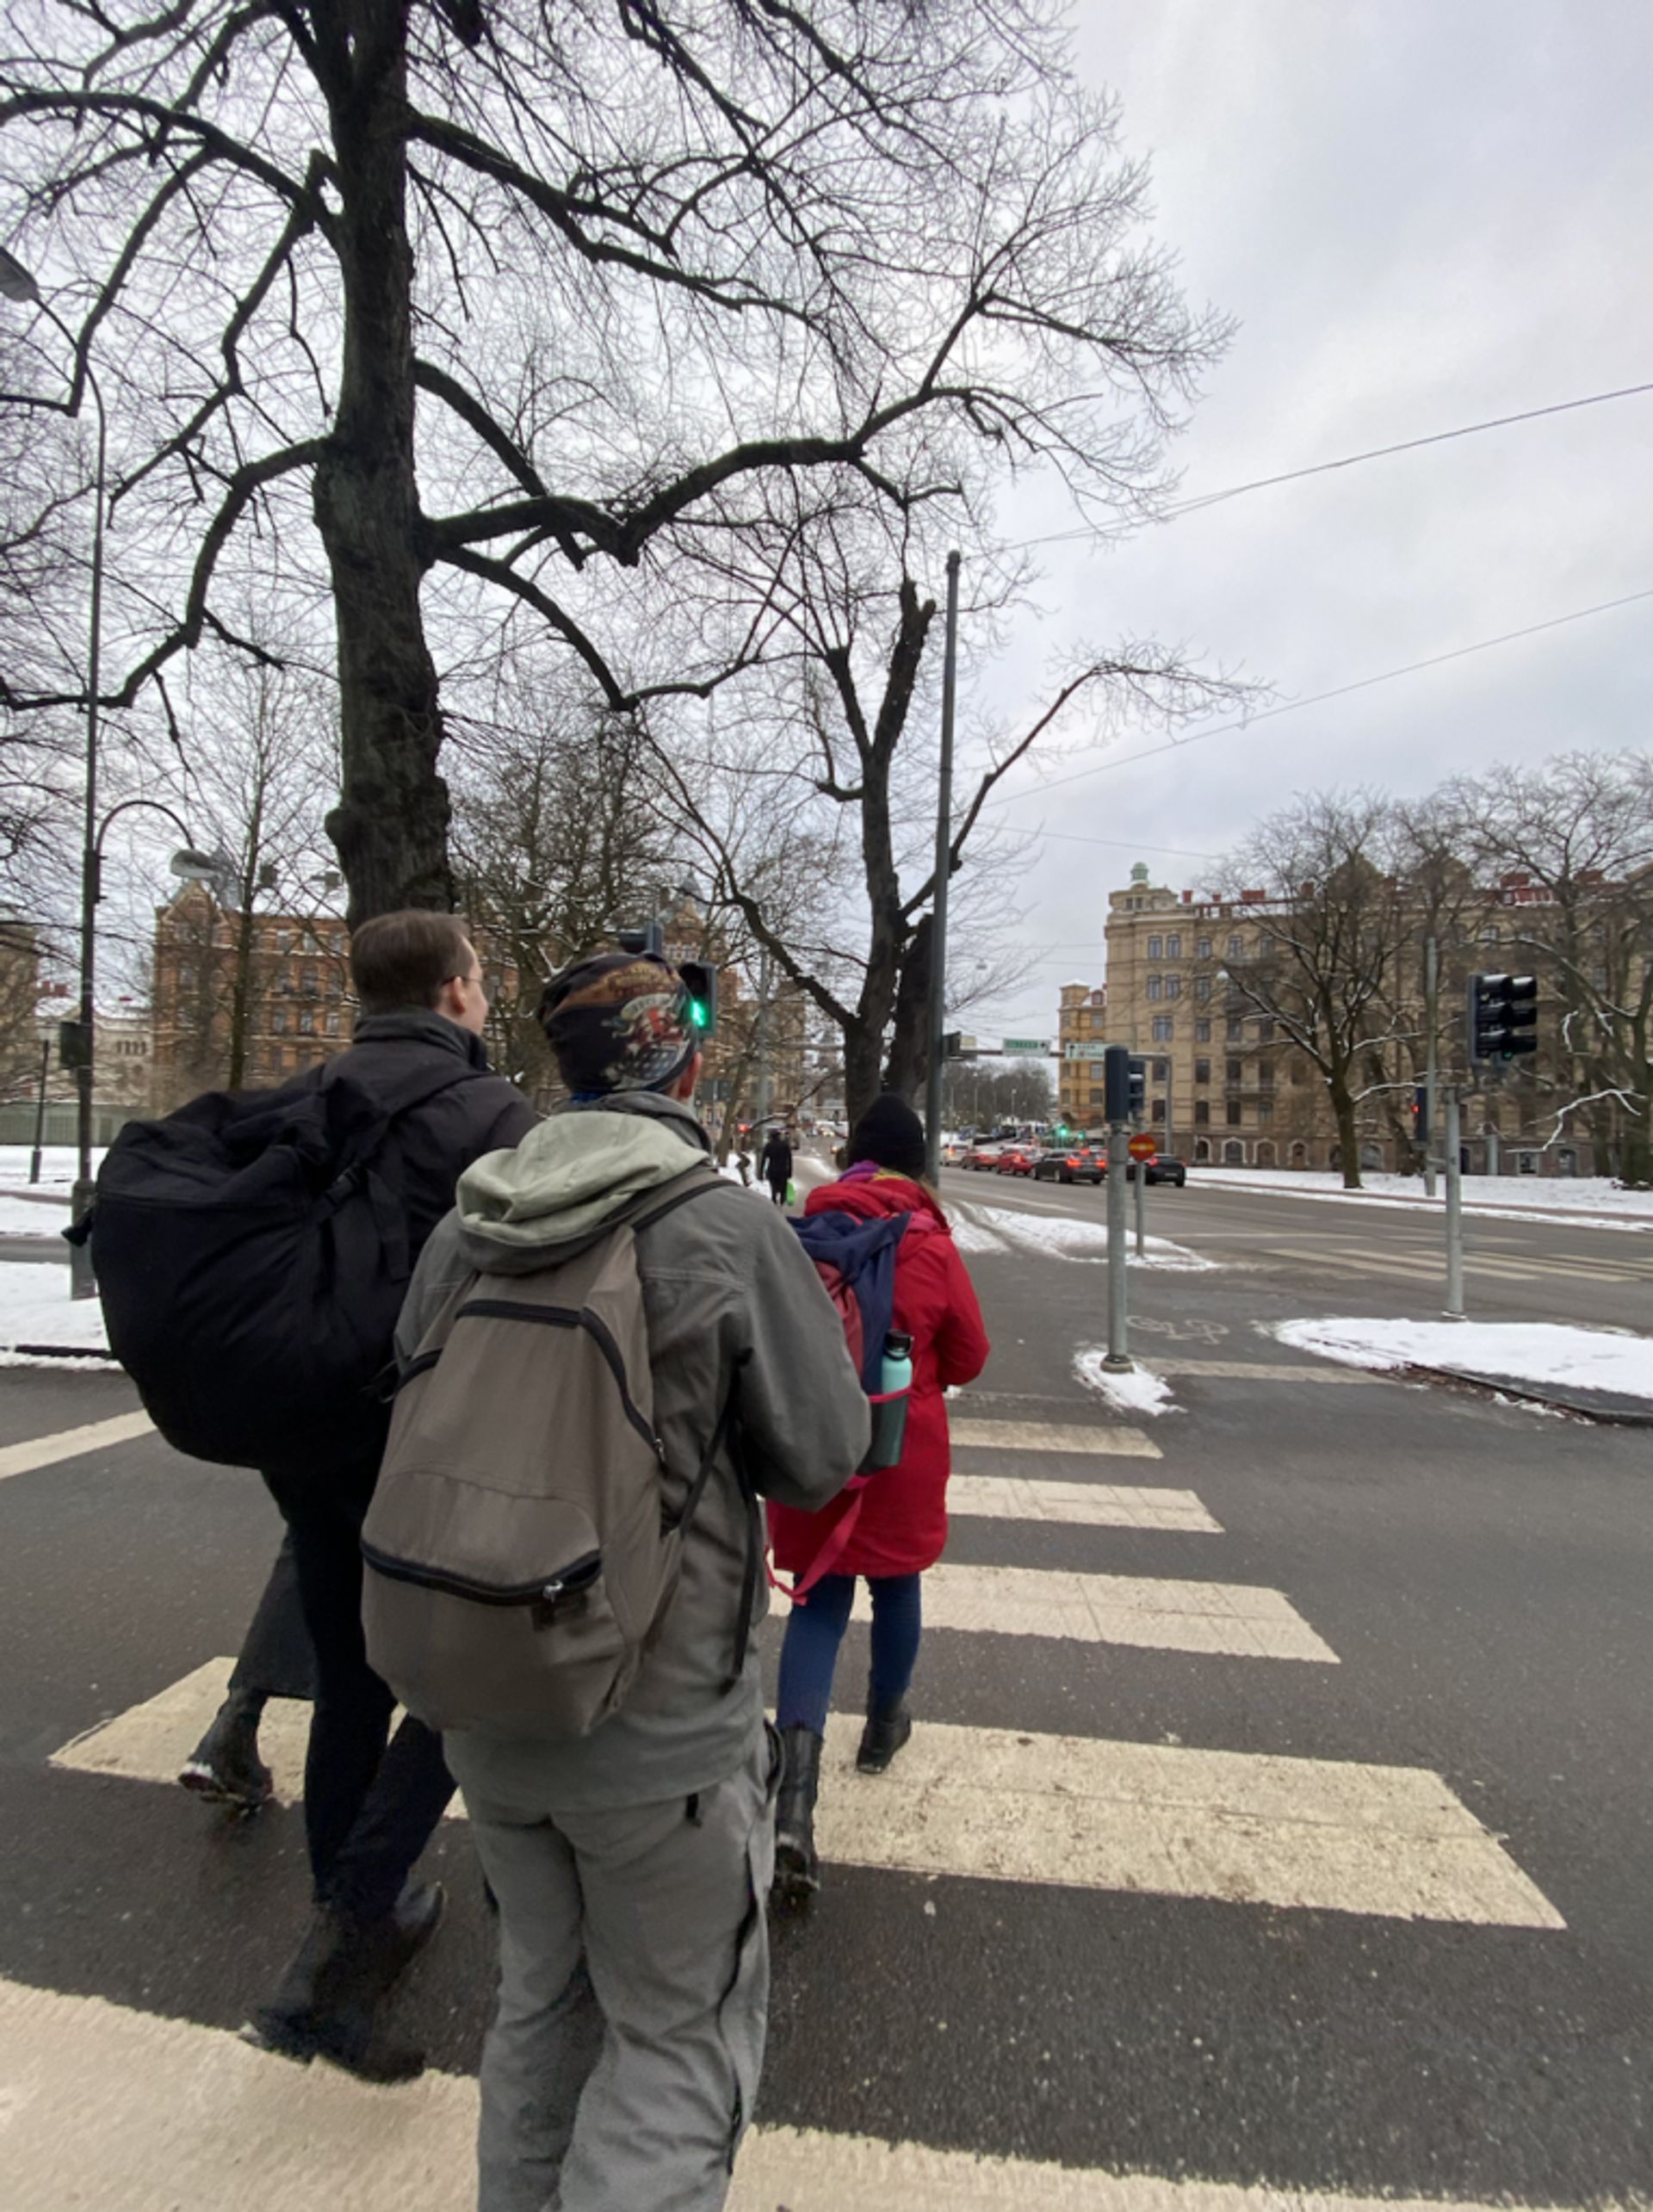 International students, dressed in winter attire, are crossing a zebra crossing in an urban environment on a cloudy day.